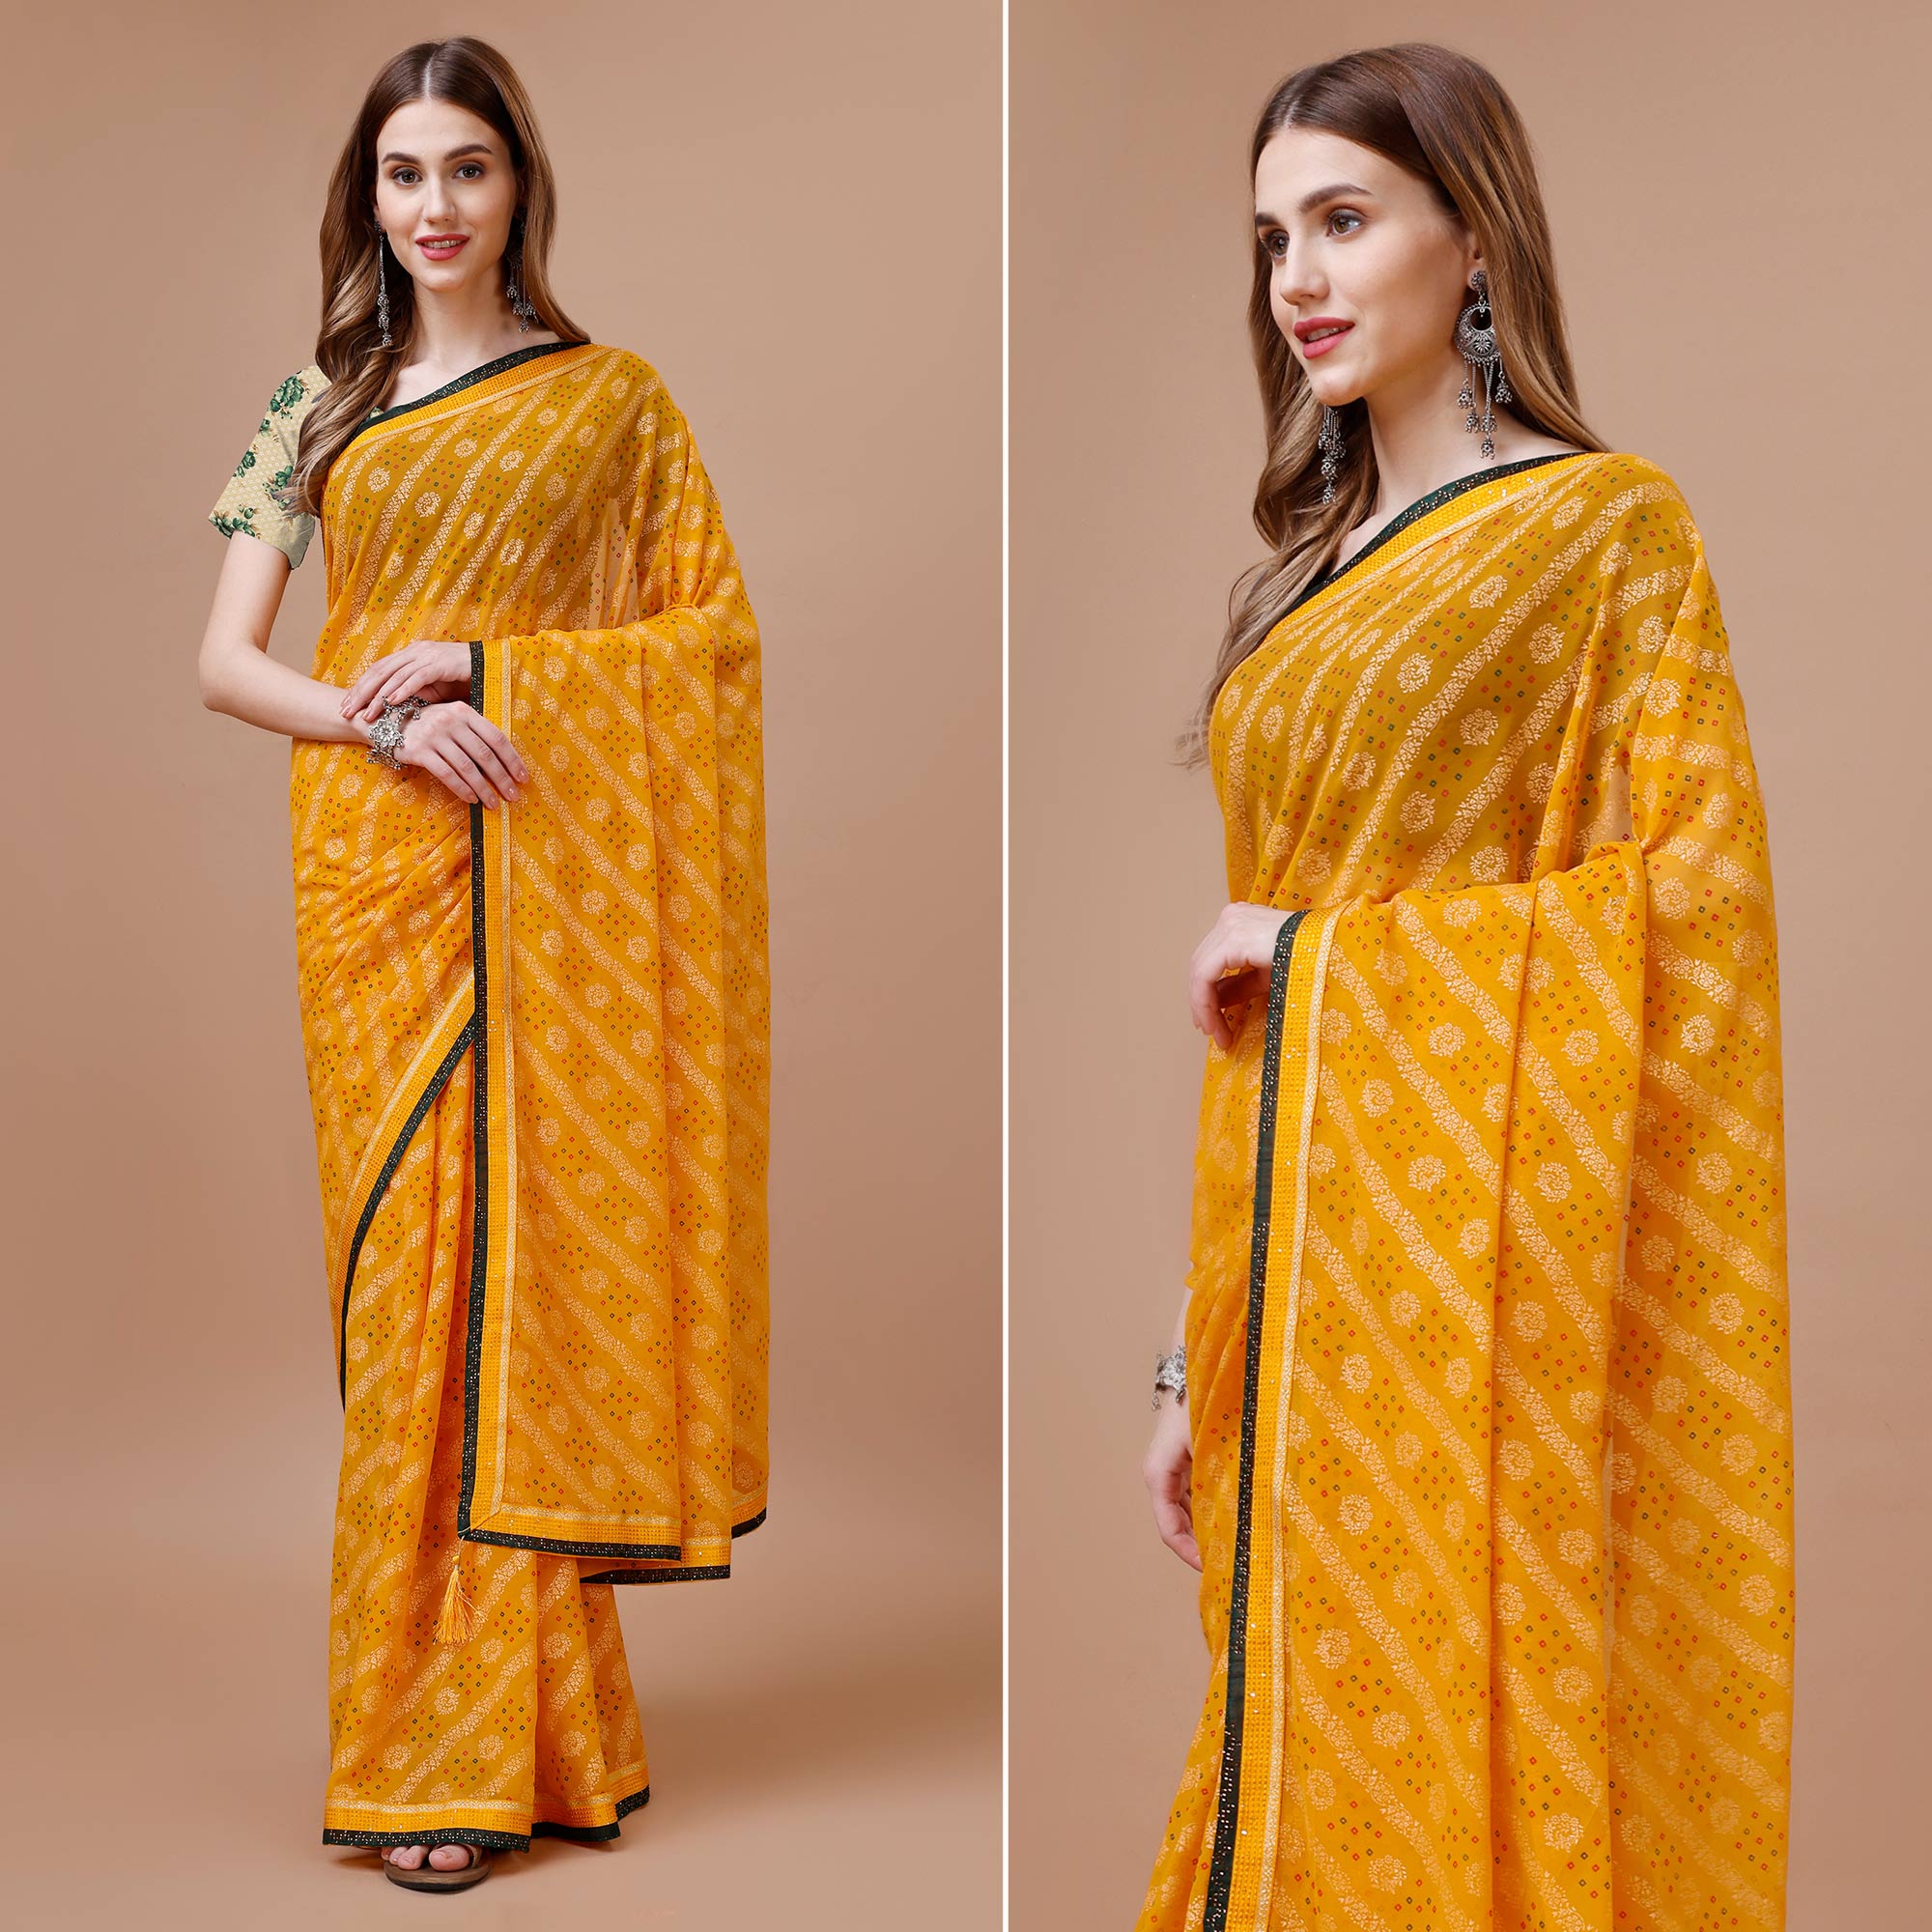 Yellow Floral Foil Printed Chiffon Saree With Lace Border